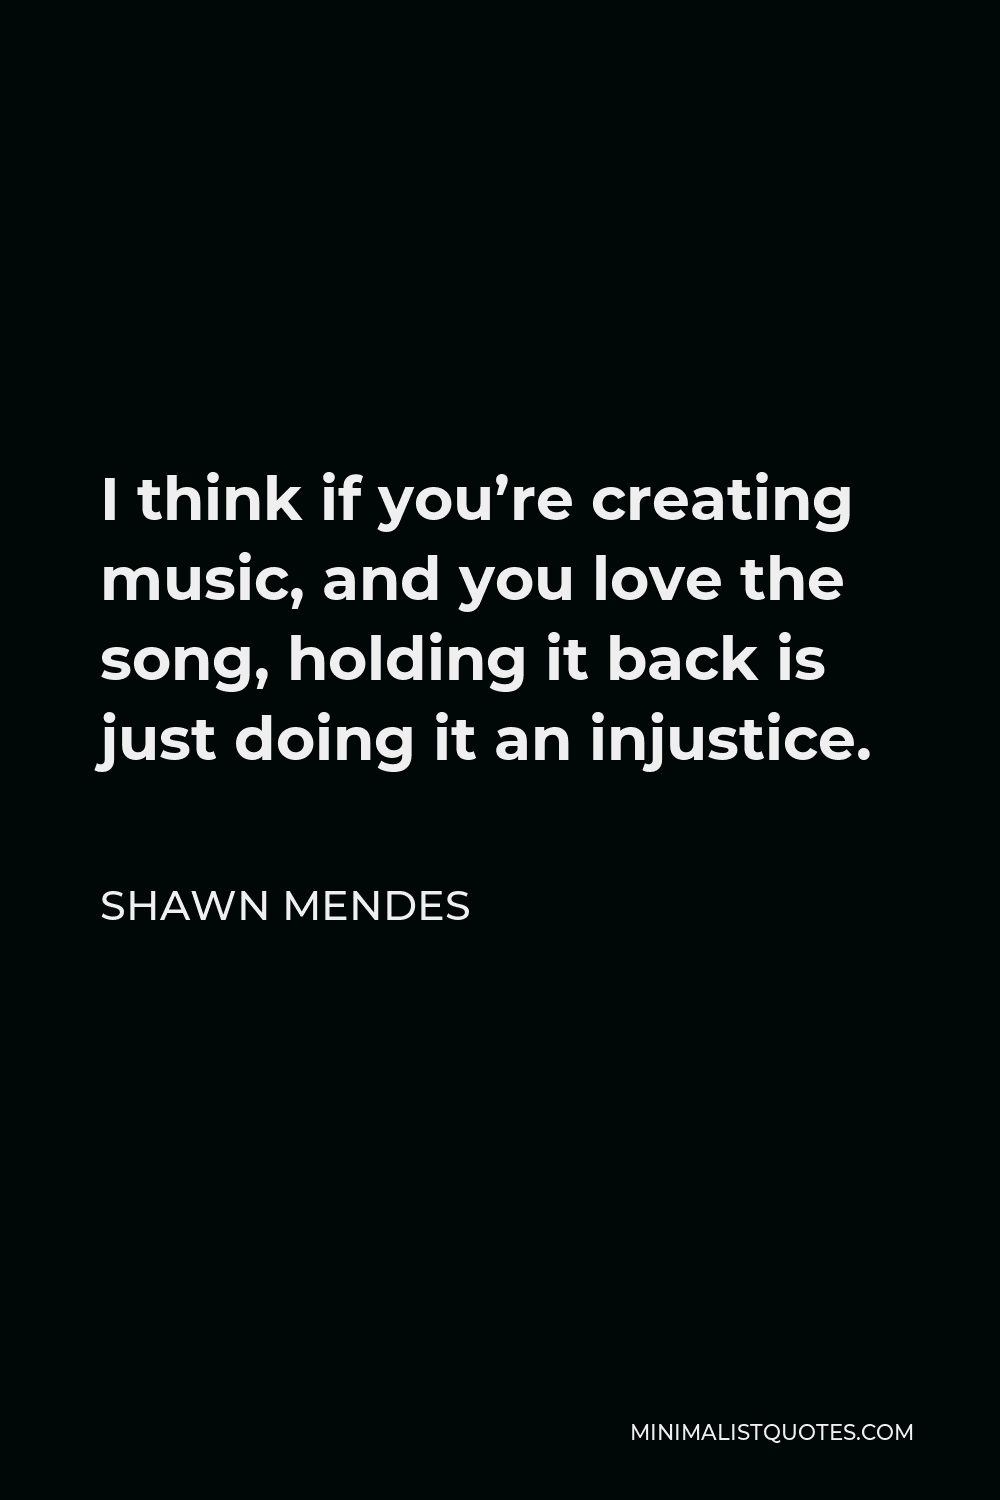 Shawn Mendes Quote - I think if you’re creating music, and you love the song, holding it back is just doing it an injustice.